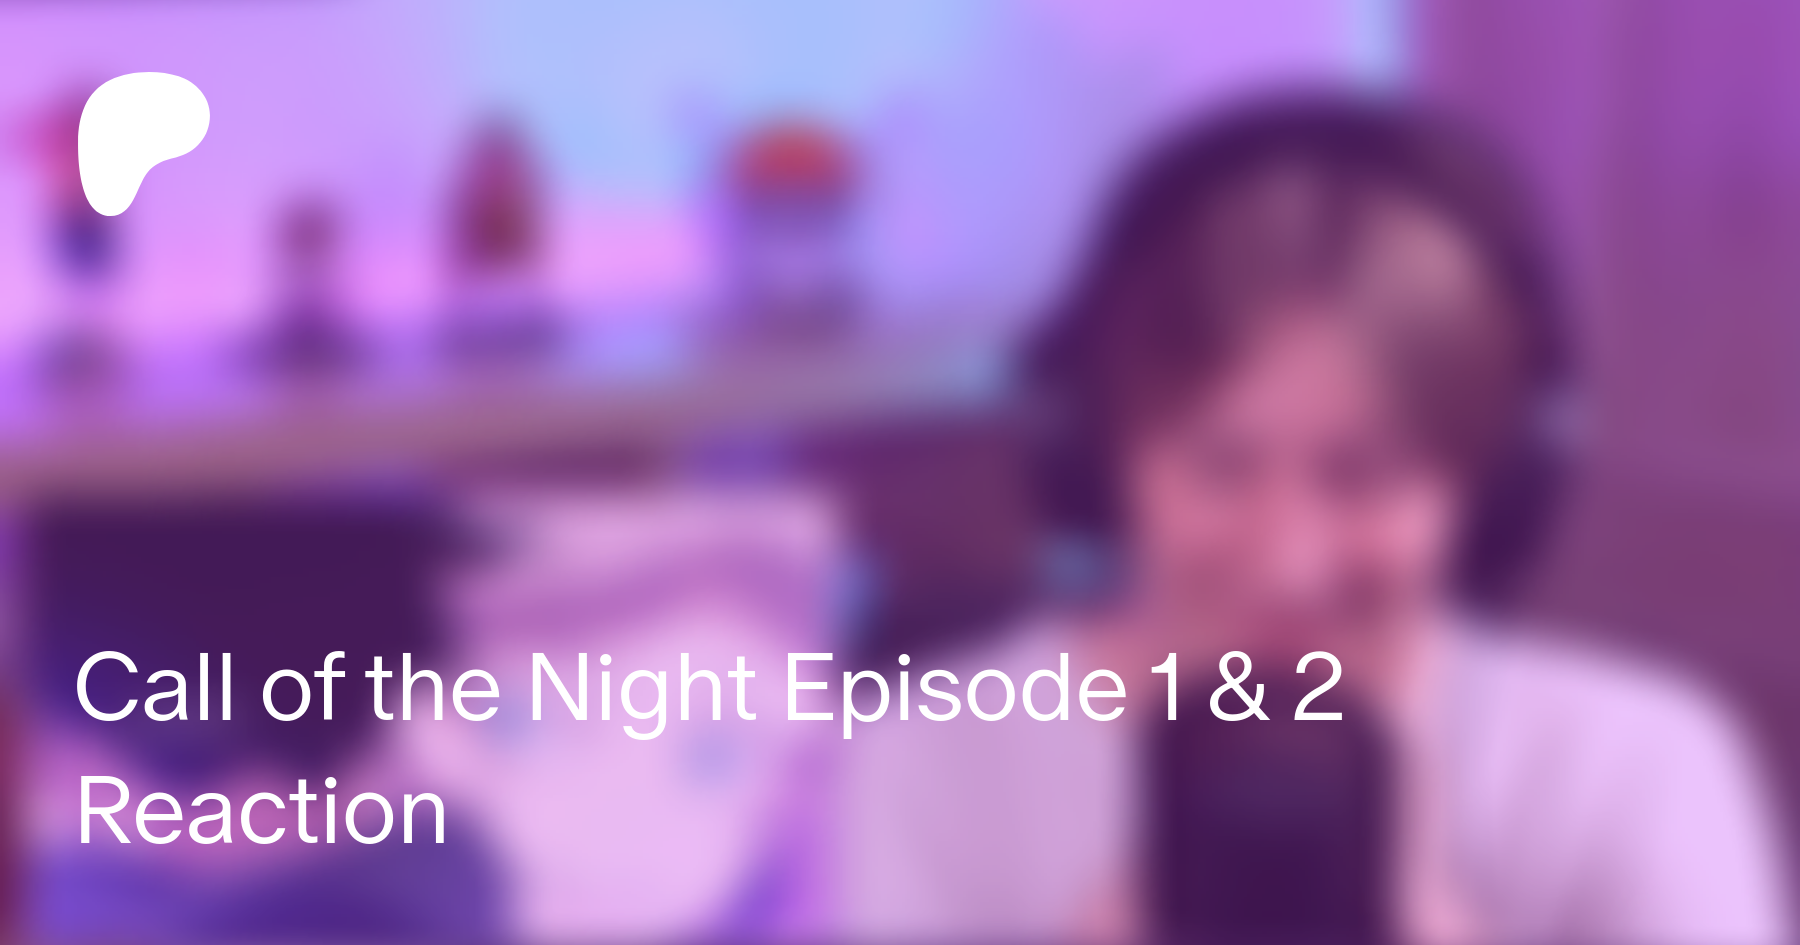 Episode 1, Call of the Night